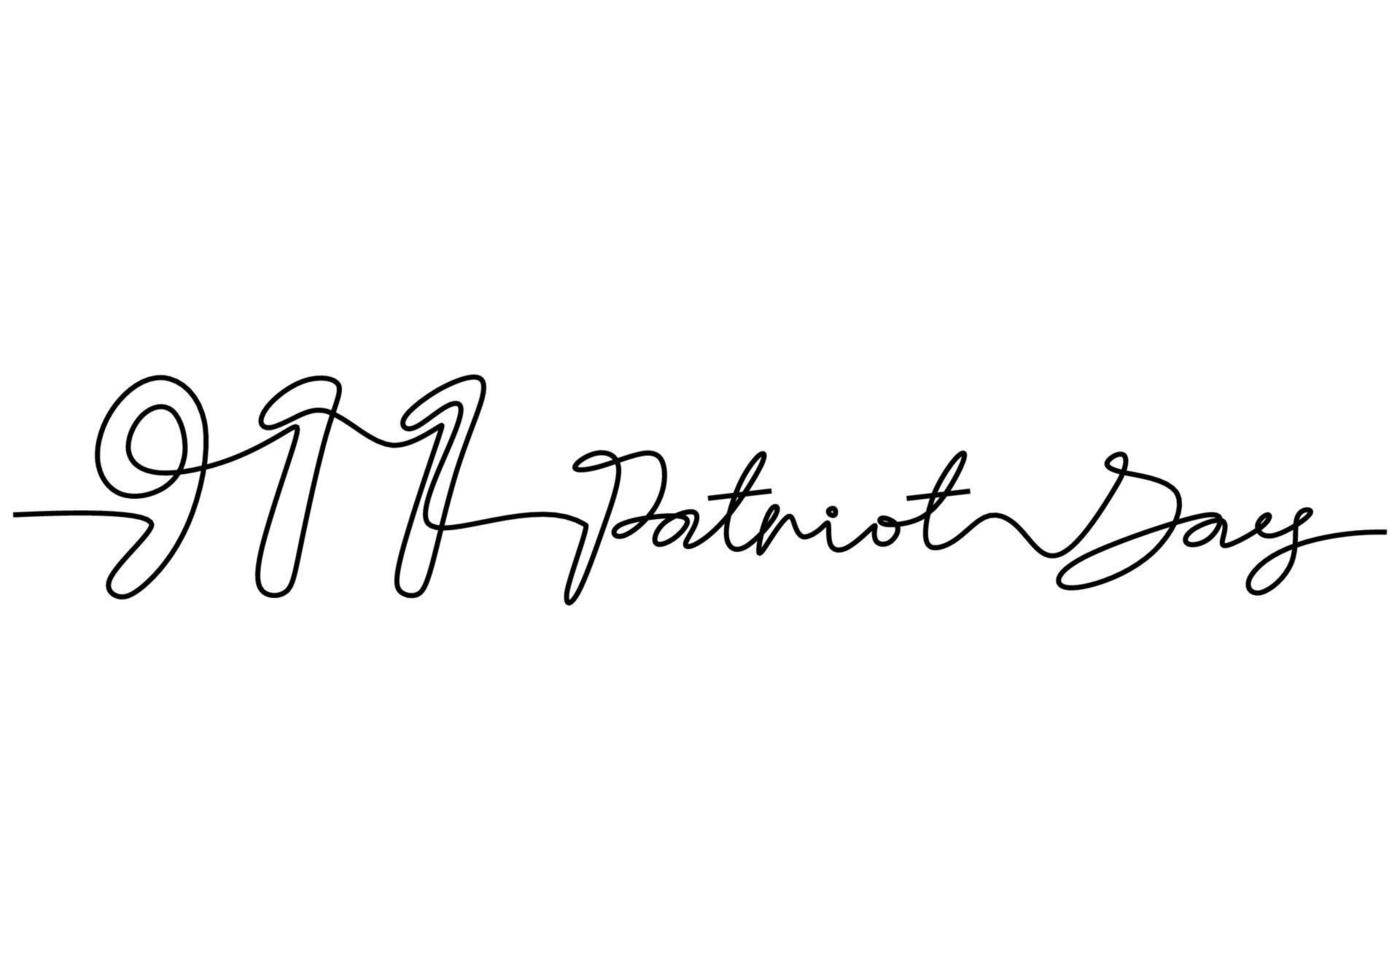 Continuous one line of 911 patriot day letter word hand written vector